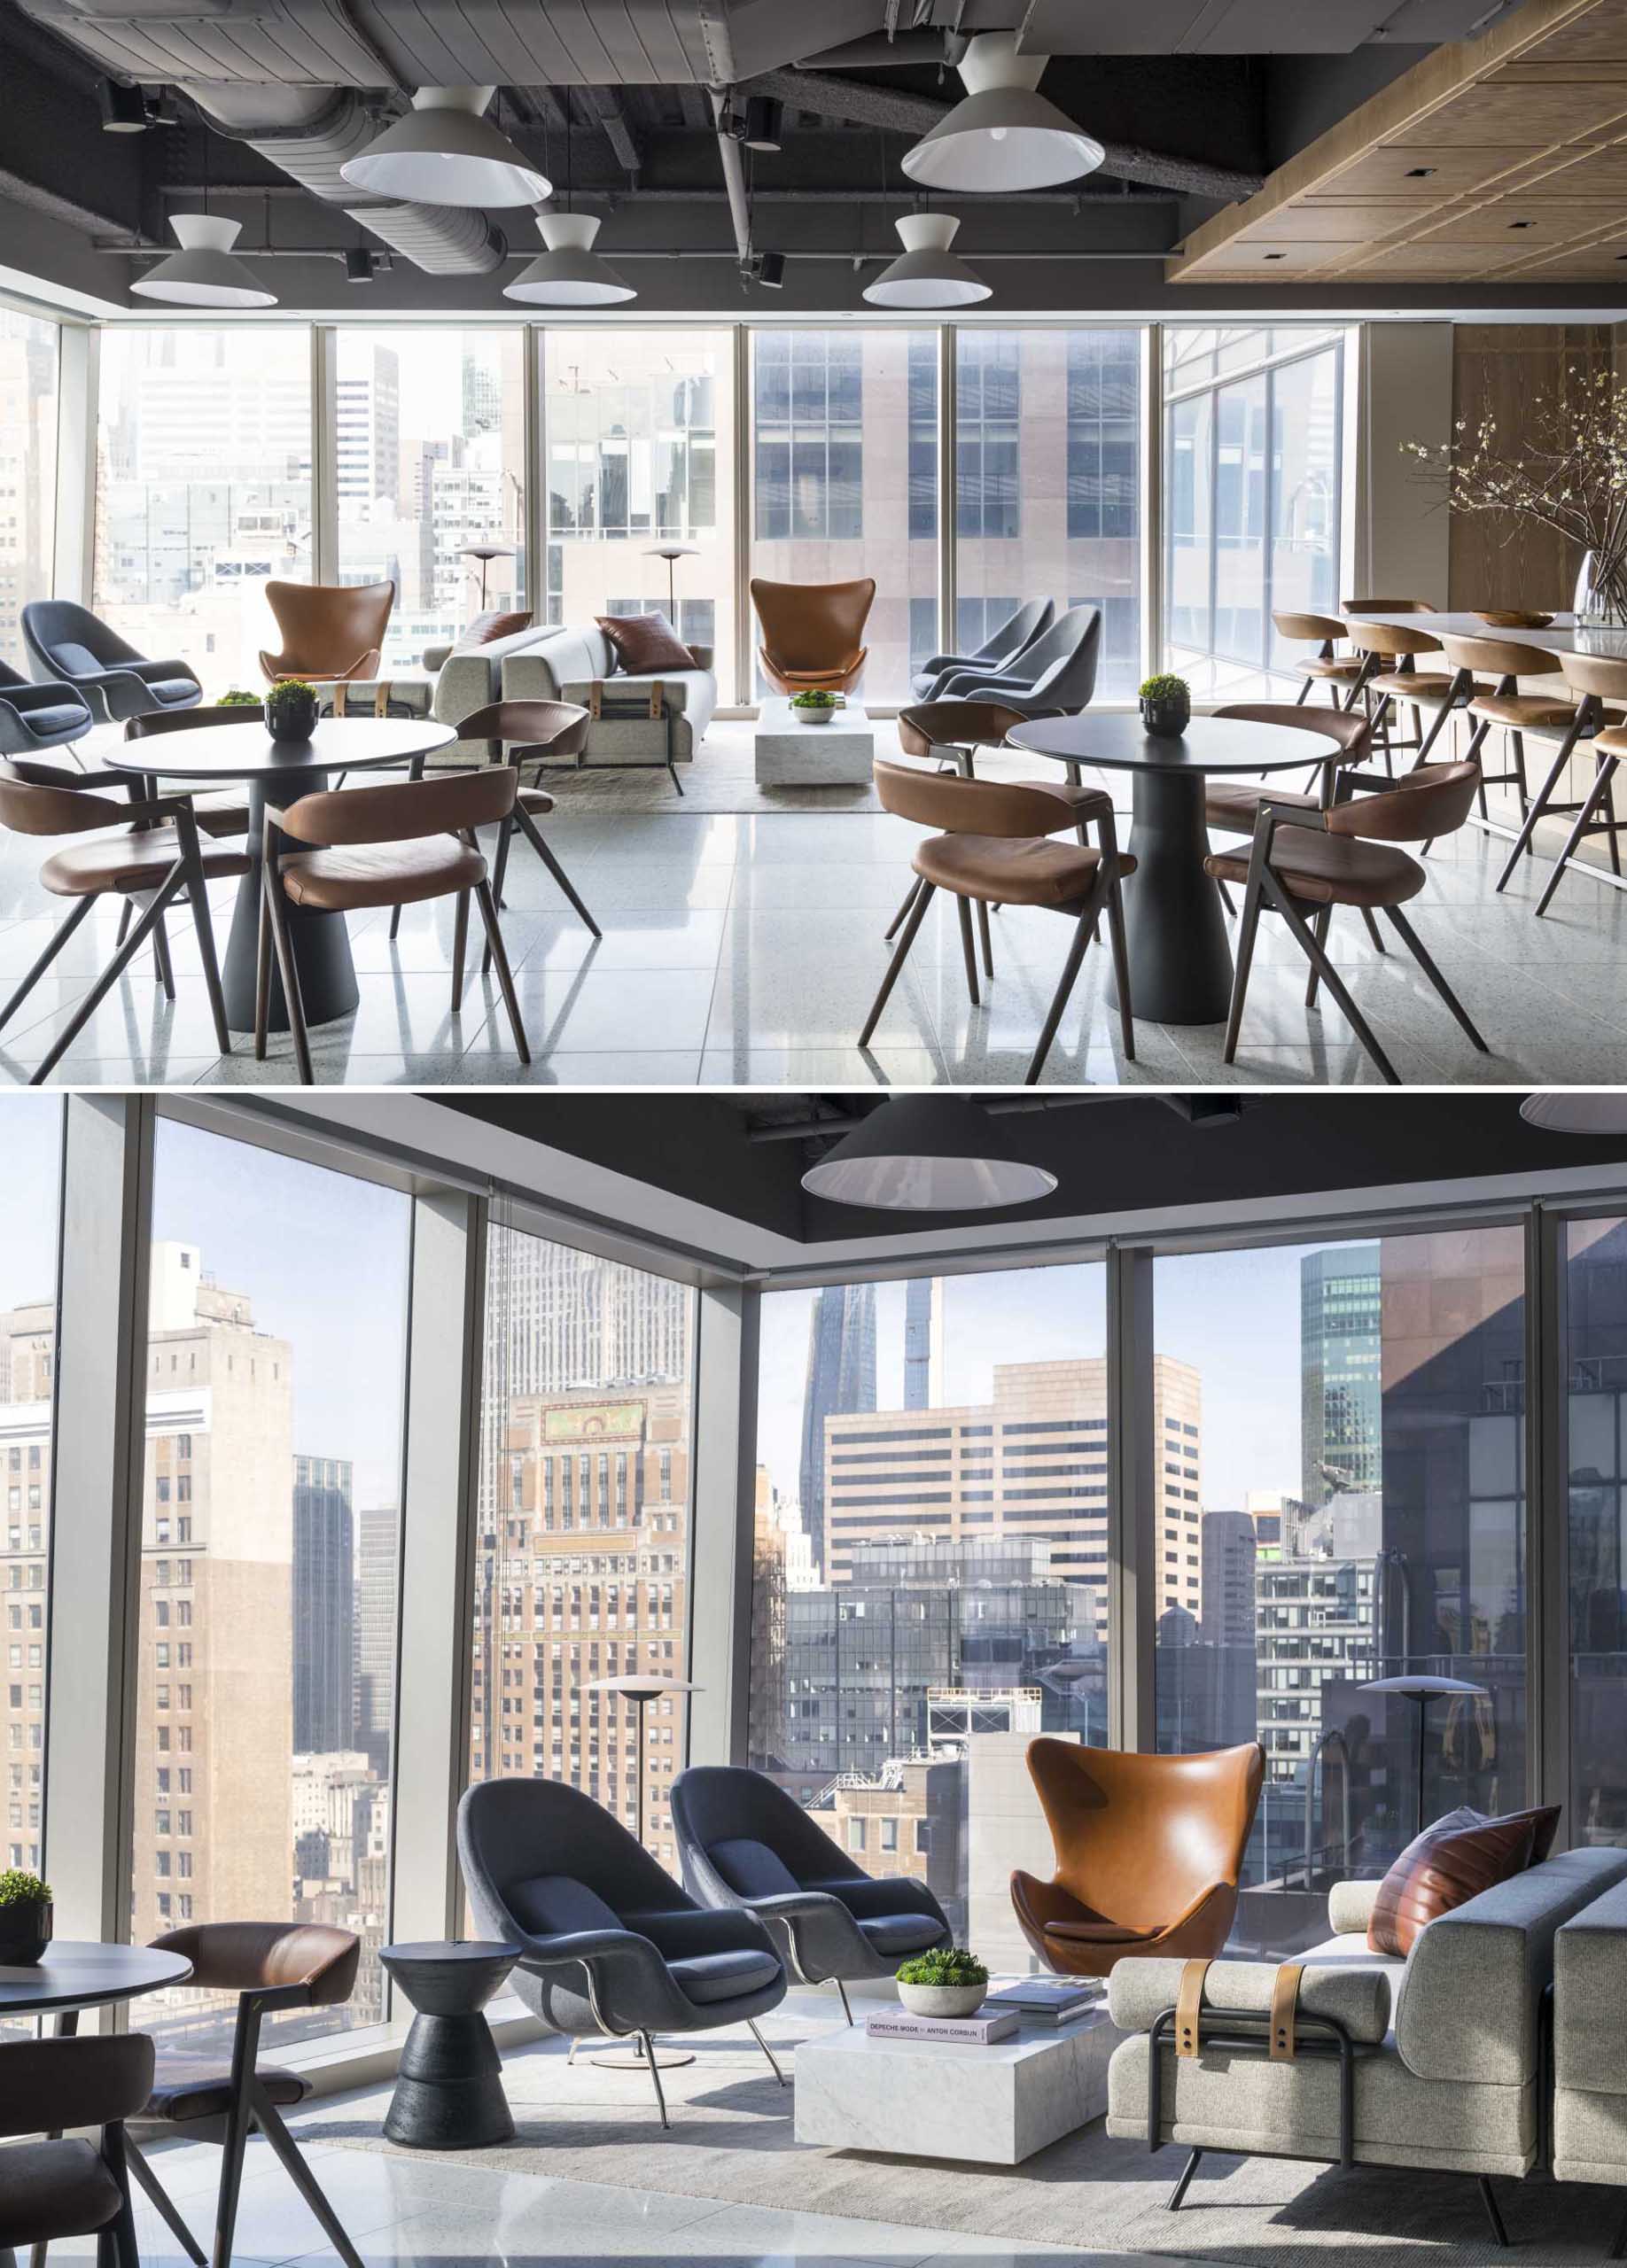 A modern workplace has a Clubhouse with tables and chairs, banquette seating, and lounge areas by the floor-to-ceiling windows.